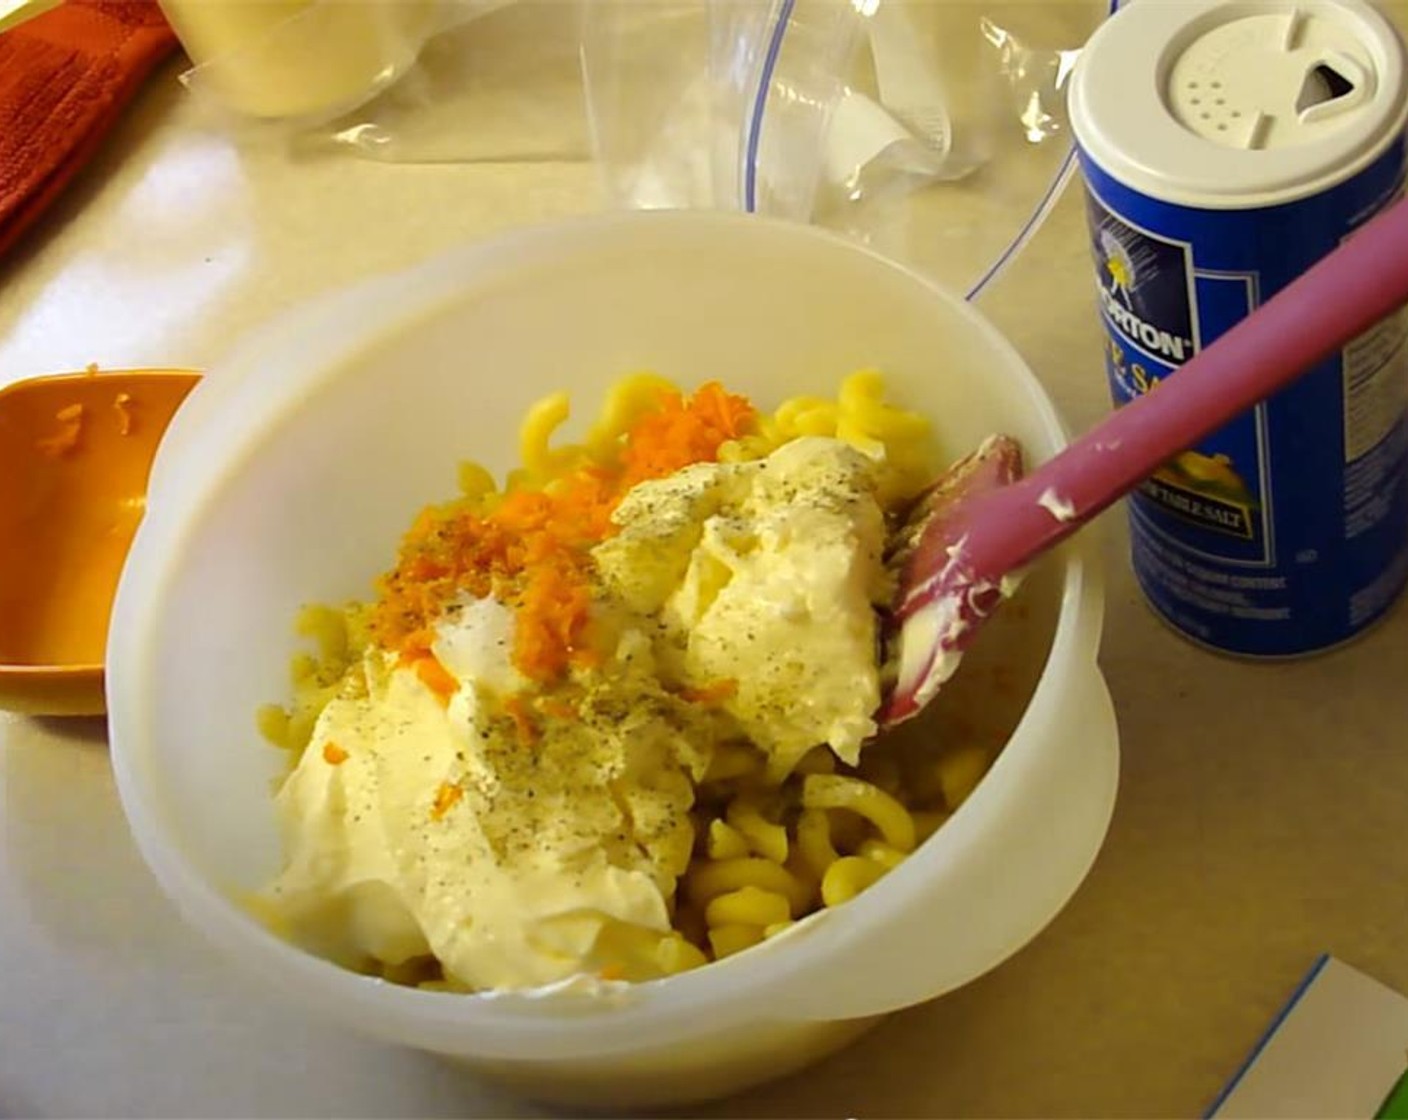 step 2 In a large bowl, combine the cooled elbow macaroni, Mayonnaise (1 cup), Imitation Crab (3 oz), Carrot (1/2 Tbsp), Celery (1 tsp), Onion (1 tsp), Salt (1/2 tsp), Ground Black Pepper (1/4 tsp), Granulated Sugar (1/4 tsp), and Hondashi (1/8 tsp). Mix well, and refrigerate for 4 hours.